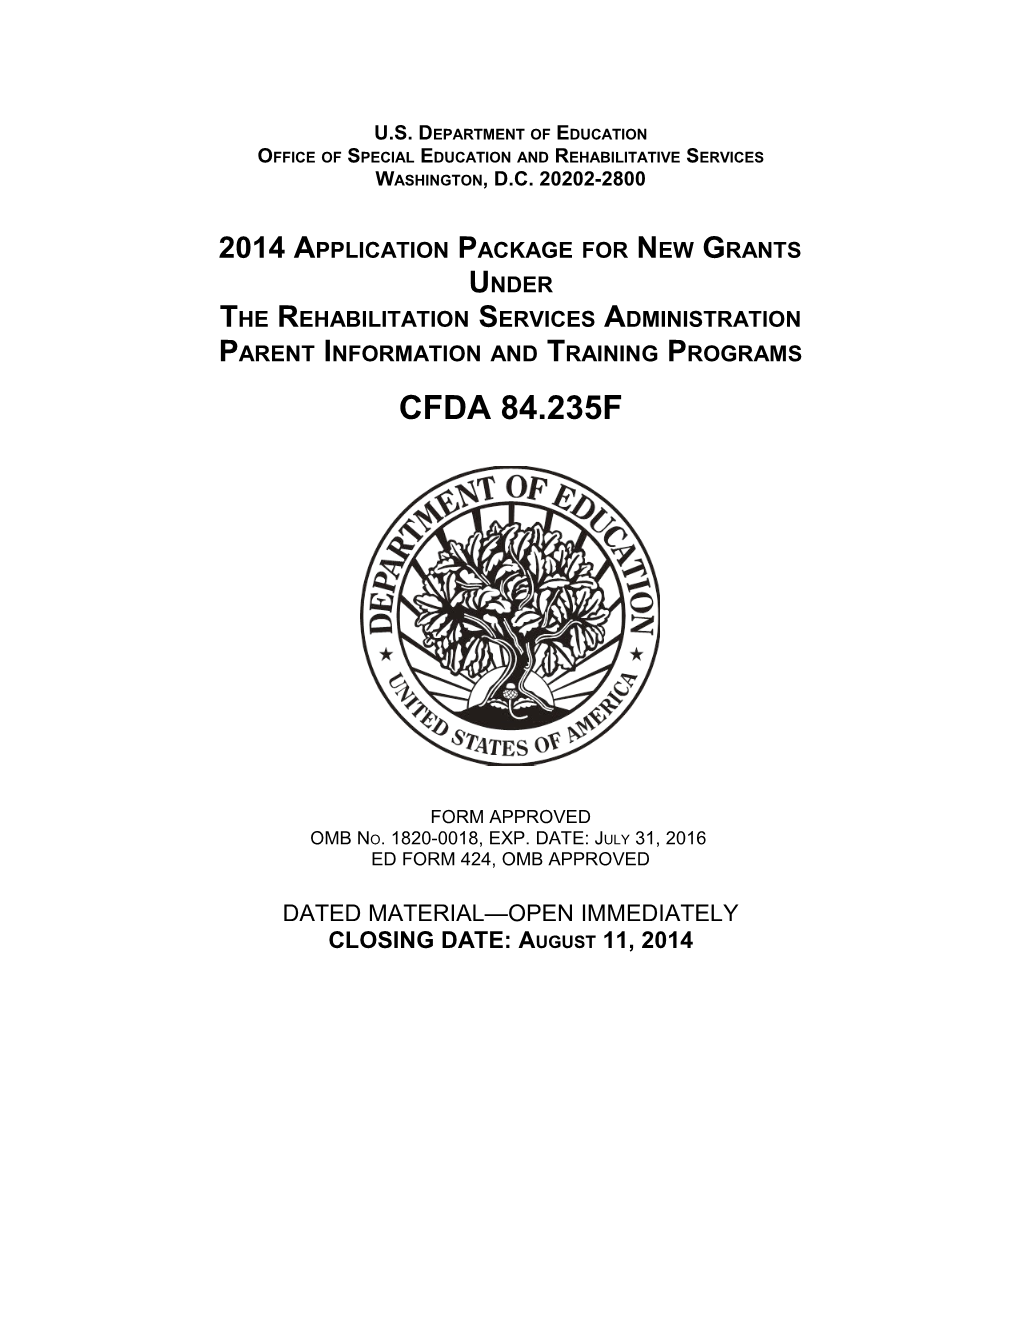 2014 Application Package for New Grants Under the Rehabilitation Services Administration;